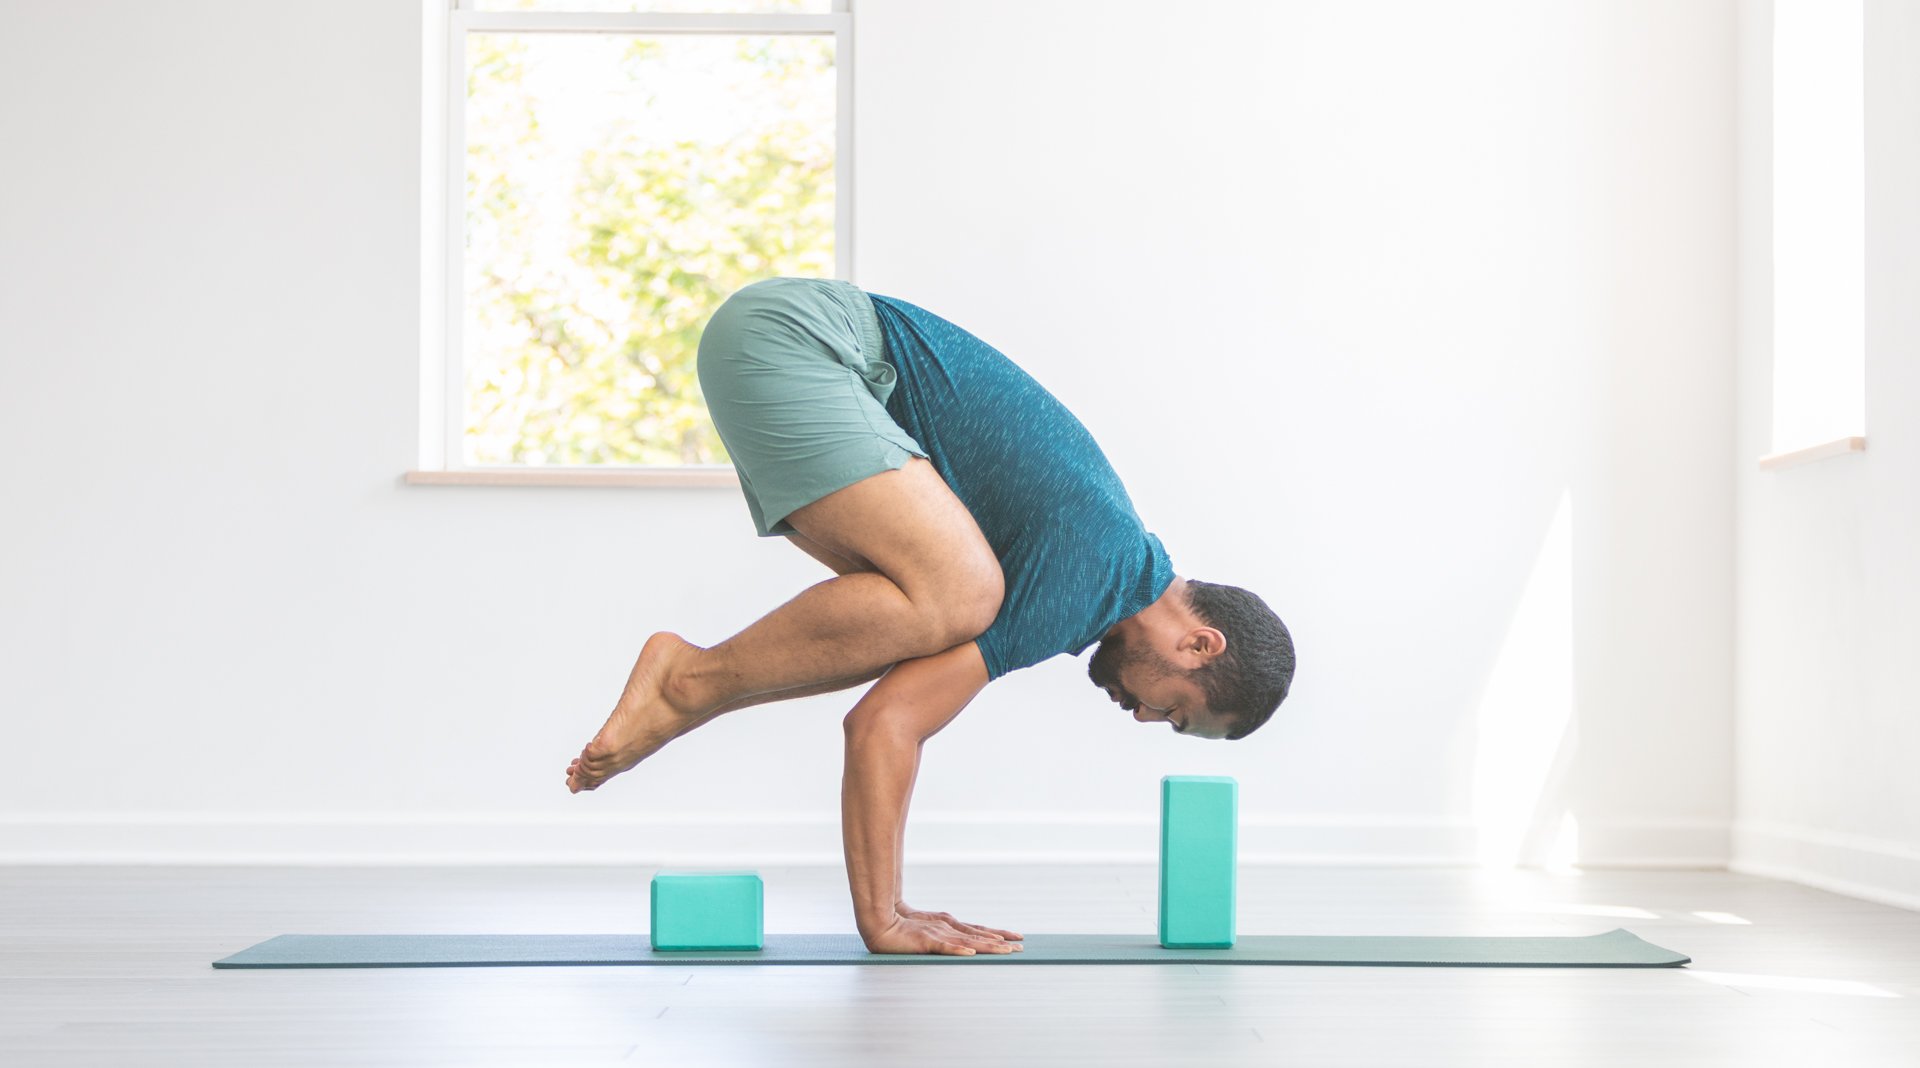 Bakasana: 5 Common Mistakes in Crow Pose (And How to Fix Them!)